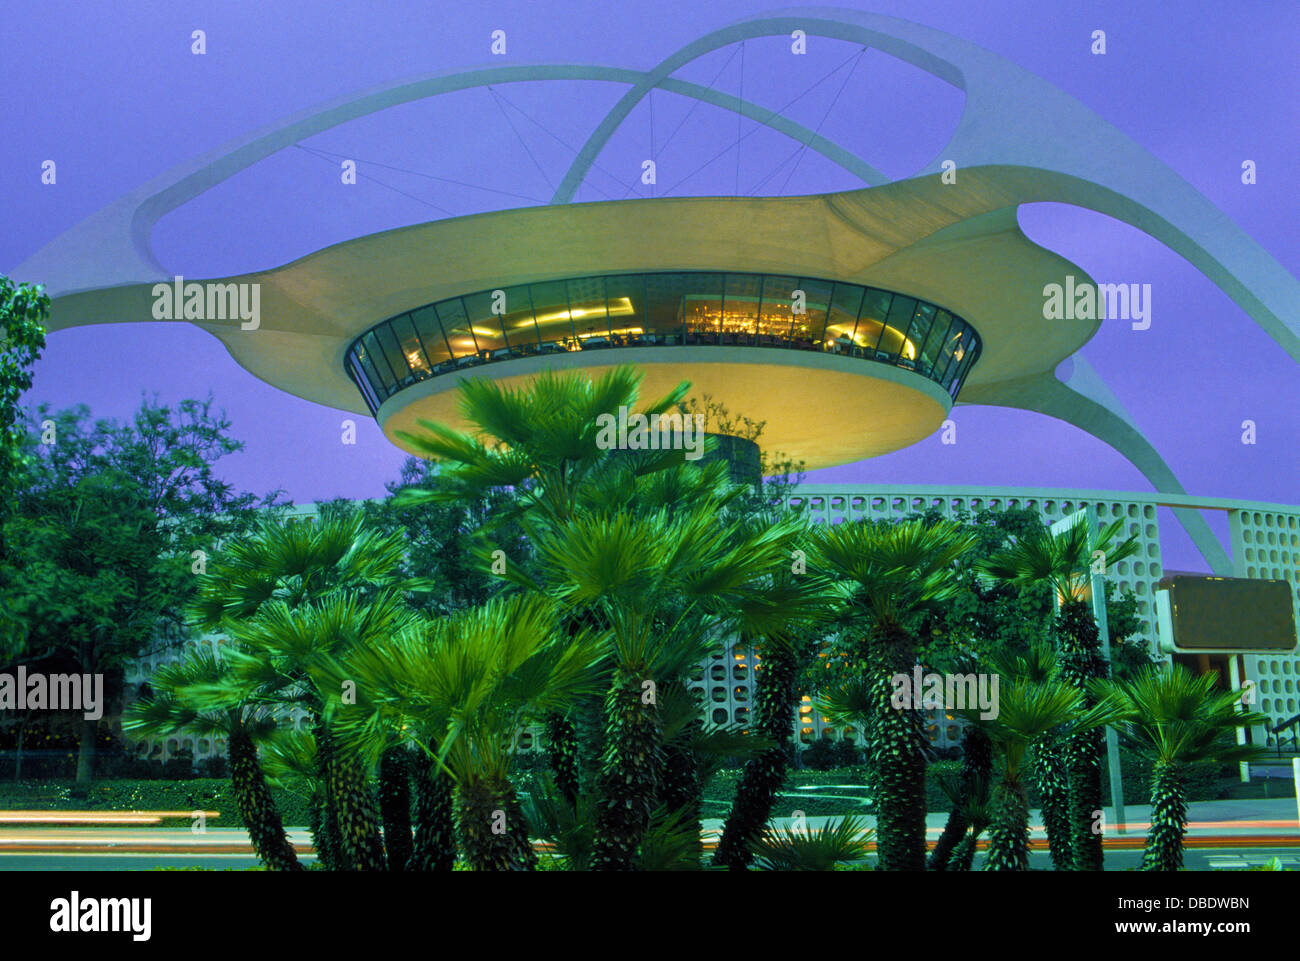 A landmark at Los Angeles International Airport (LAX) in California, USA, is the Encounter Restaurant with parabolic arches and a futuristic design. Stock Photo